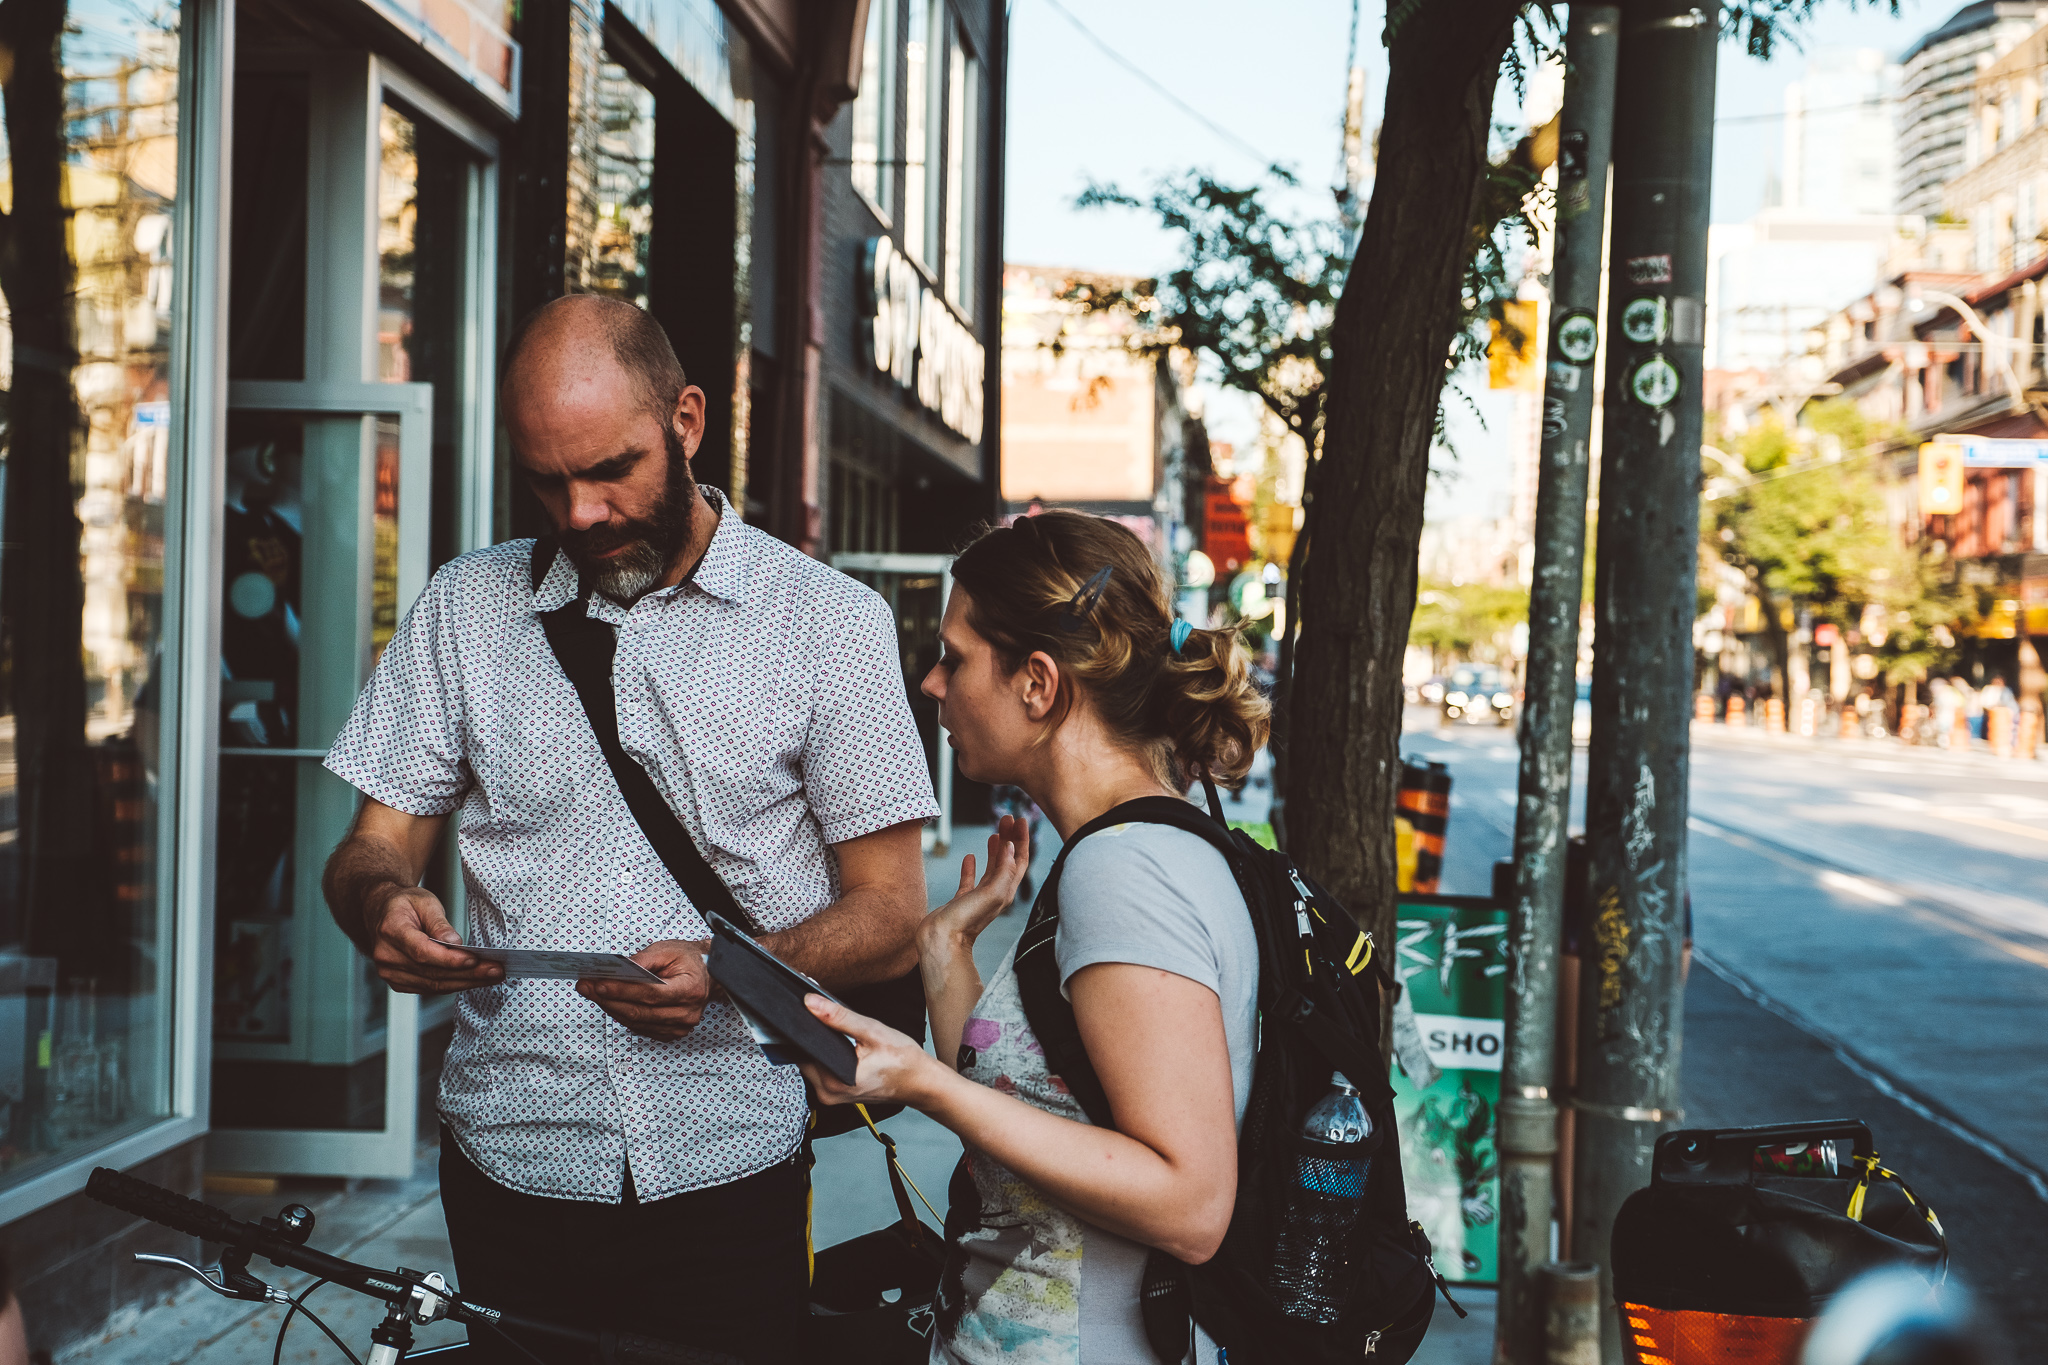 A Wheelmap ambassador talks to a passers-by on a sidewalk in Toronto and hands out a Wheelmap flyer.